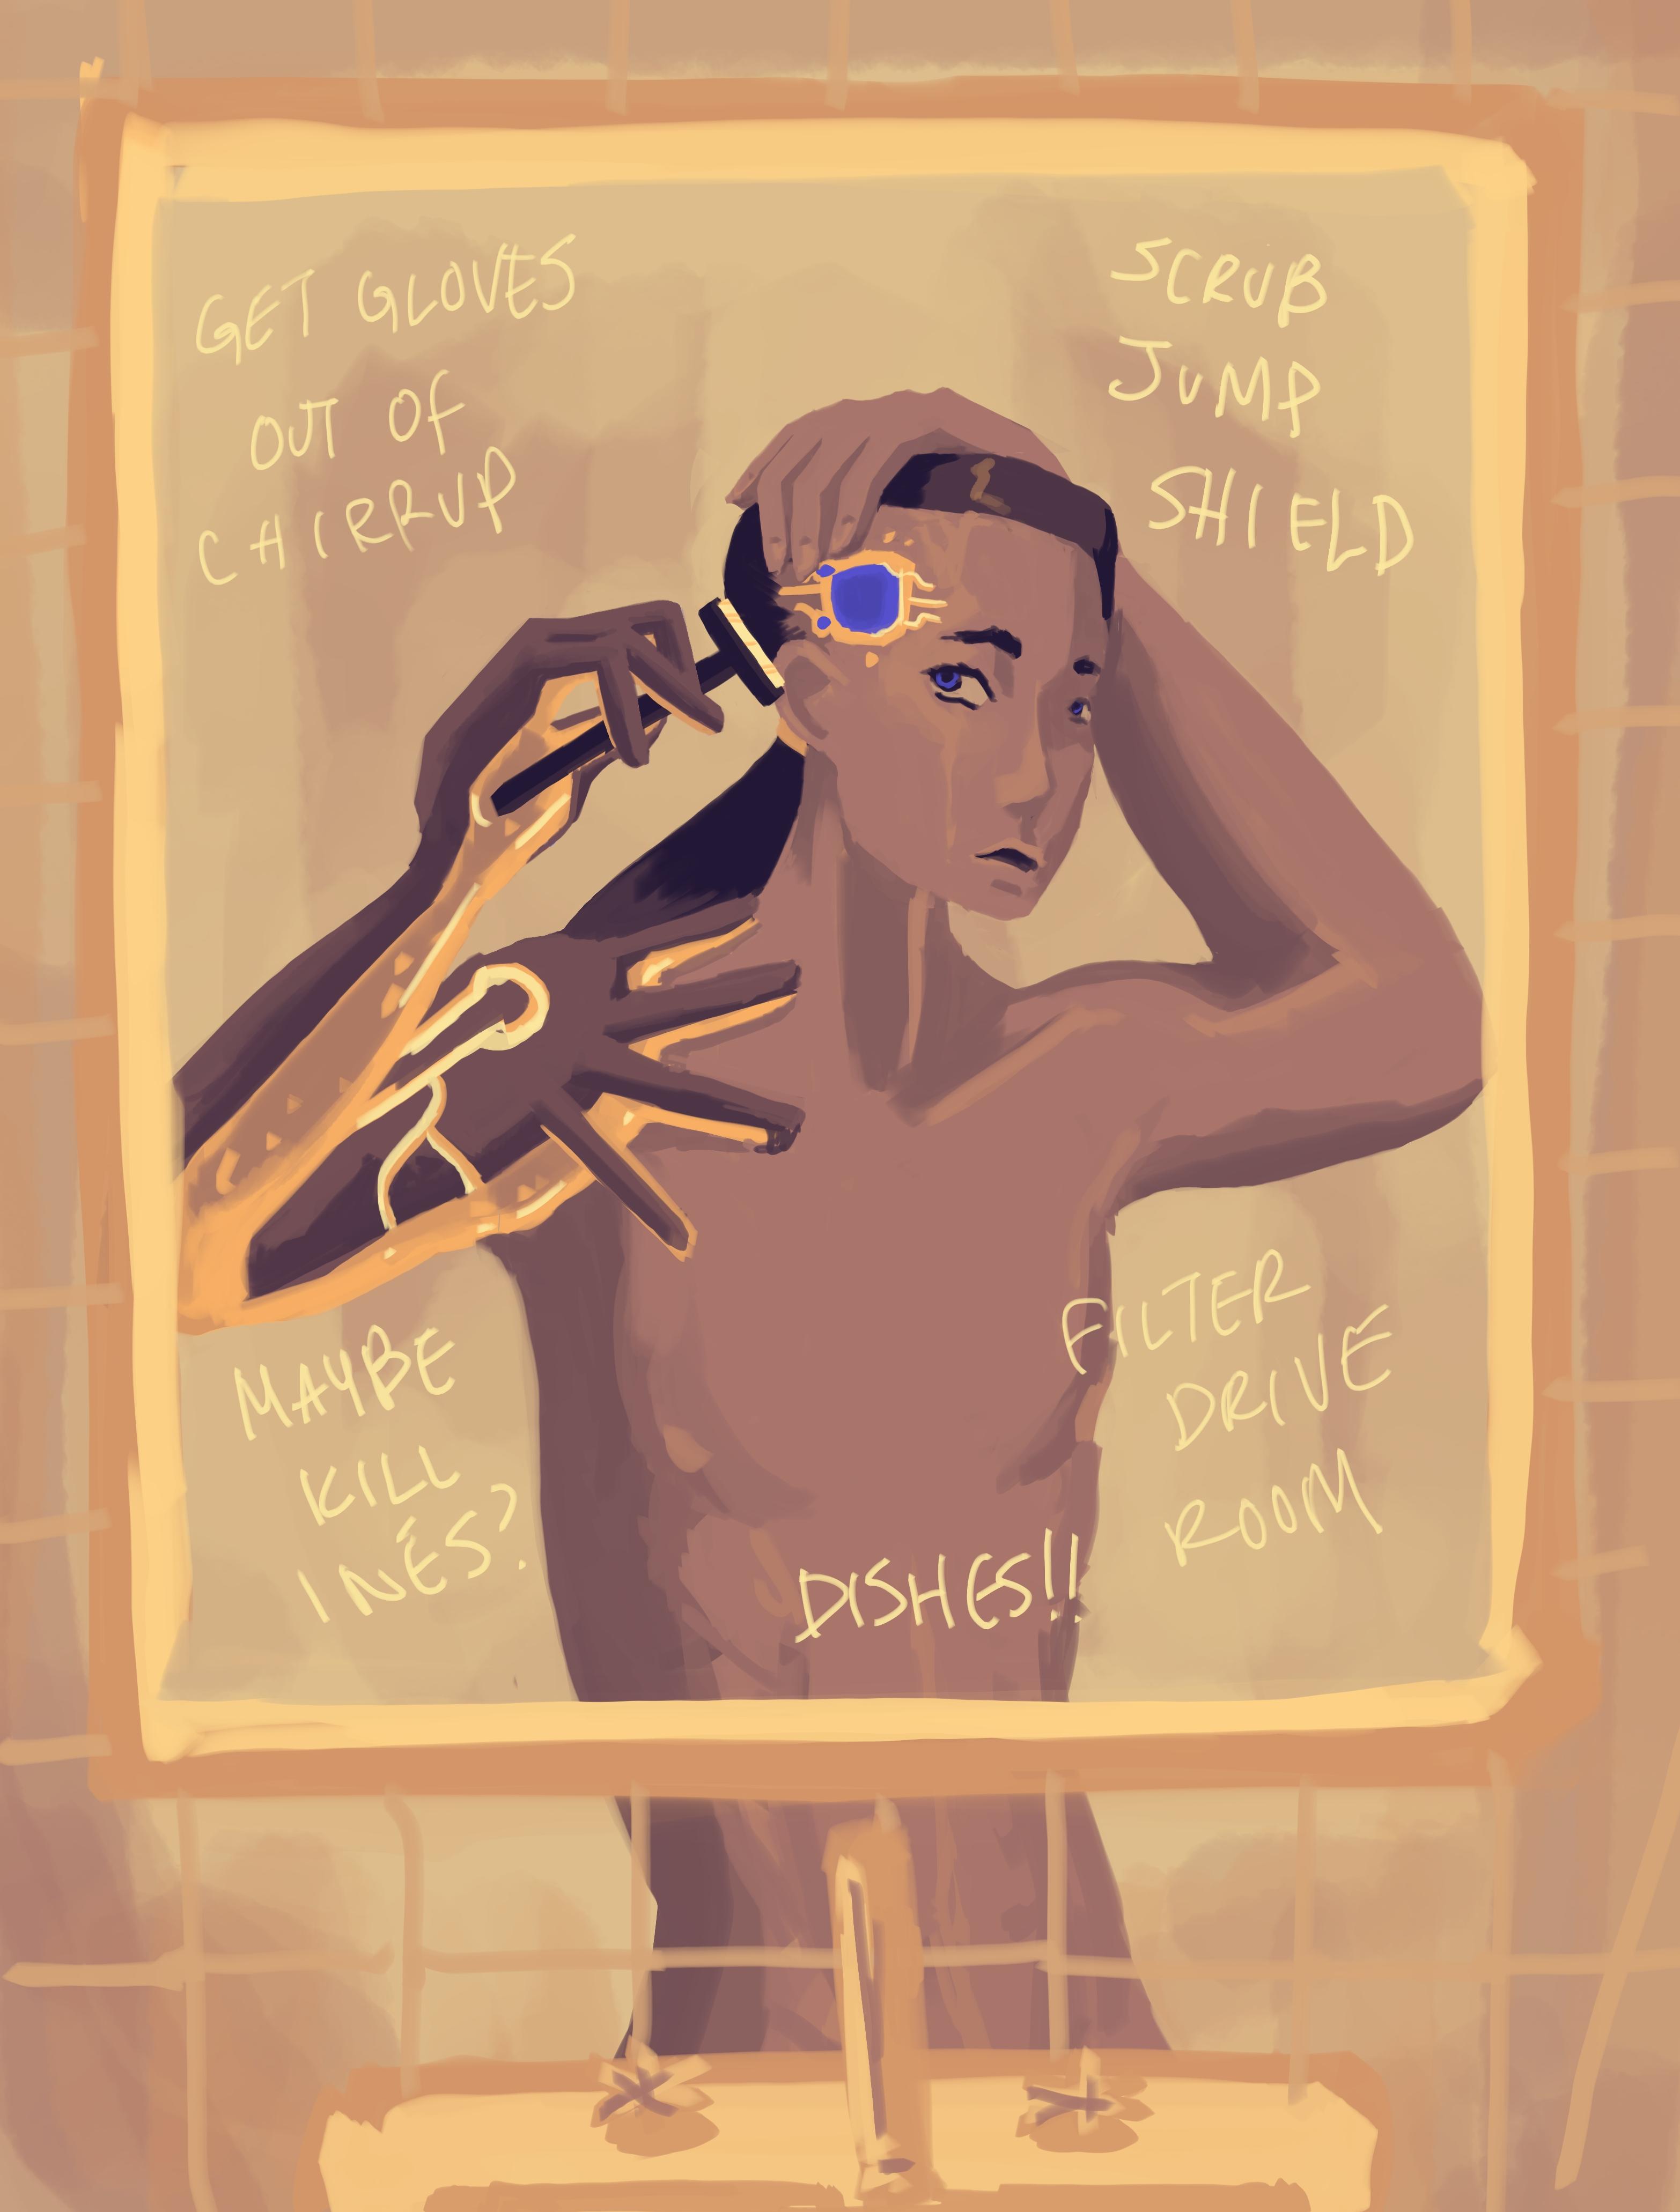 Maya stands in front of the bathroom mirror, trying to shave the hair
around her augmentation. Notes are written on the mirror, 'get gloves out of chirrup', 
'scrub jump shield', 'maybe kill Ines?', 'dishes!!', 'filter drive room'